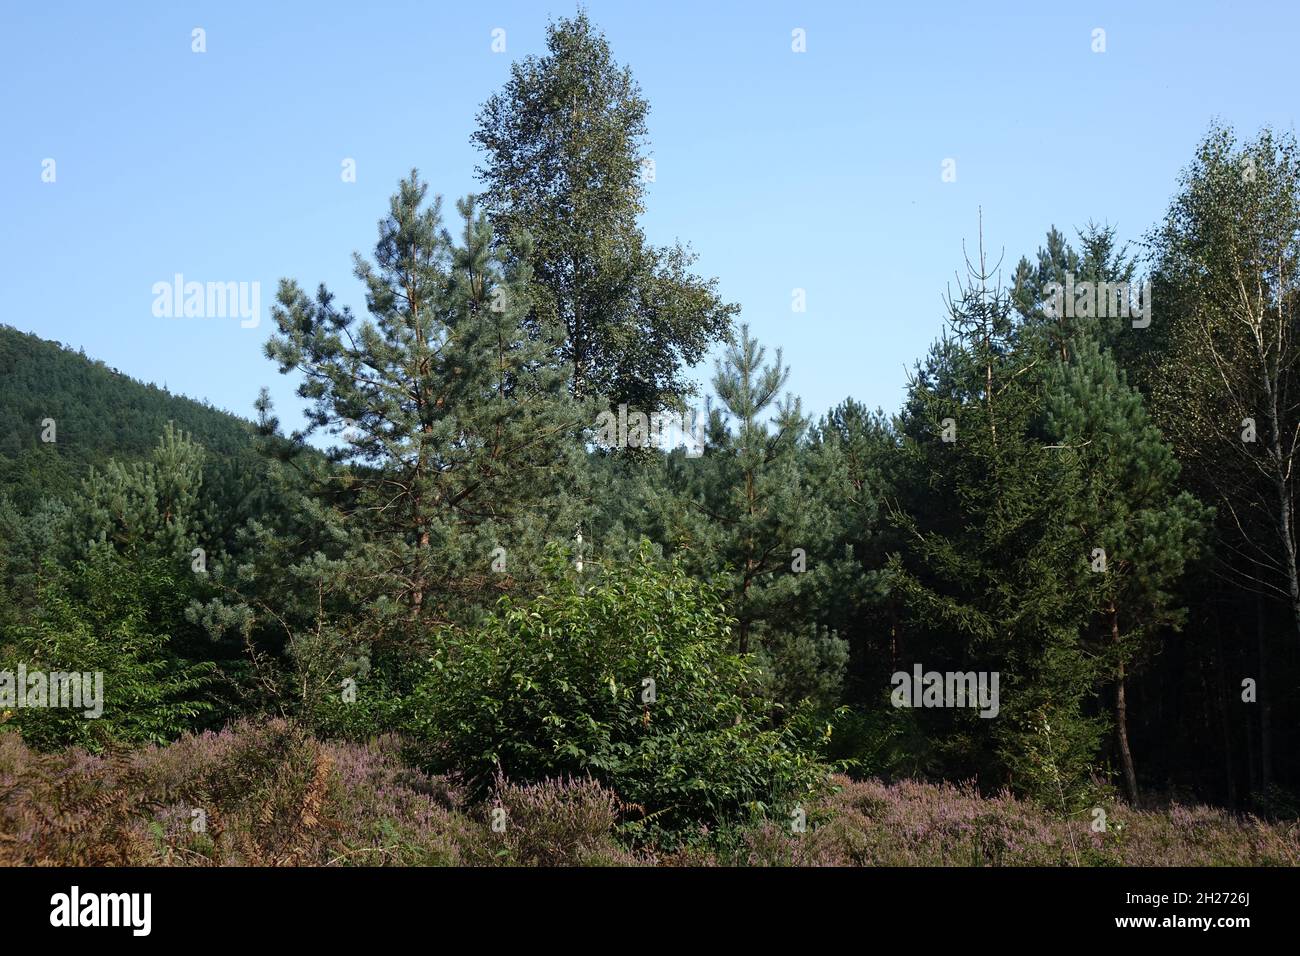 Pine trees and blossoming heath in binational natural protection habitat in late summer, Obersteinbach, Bas-Rhin, Alsace, Grand Est, France Stock Photo